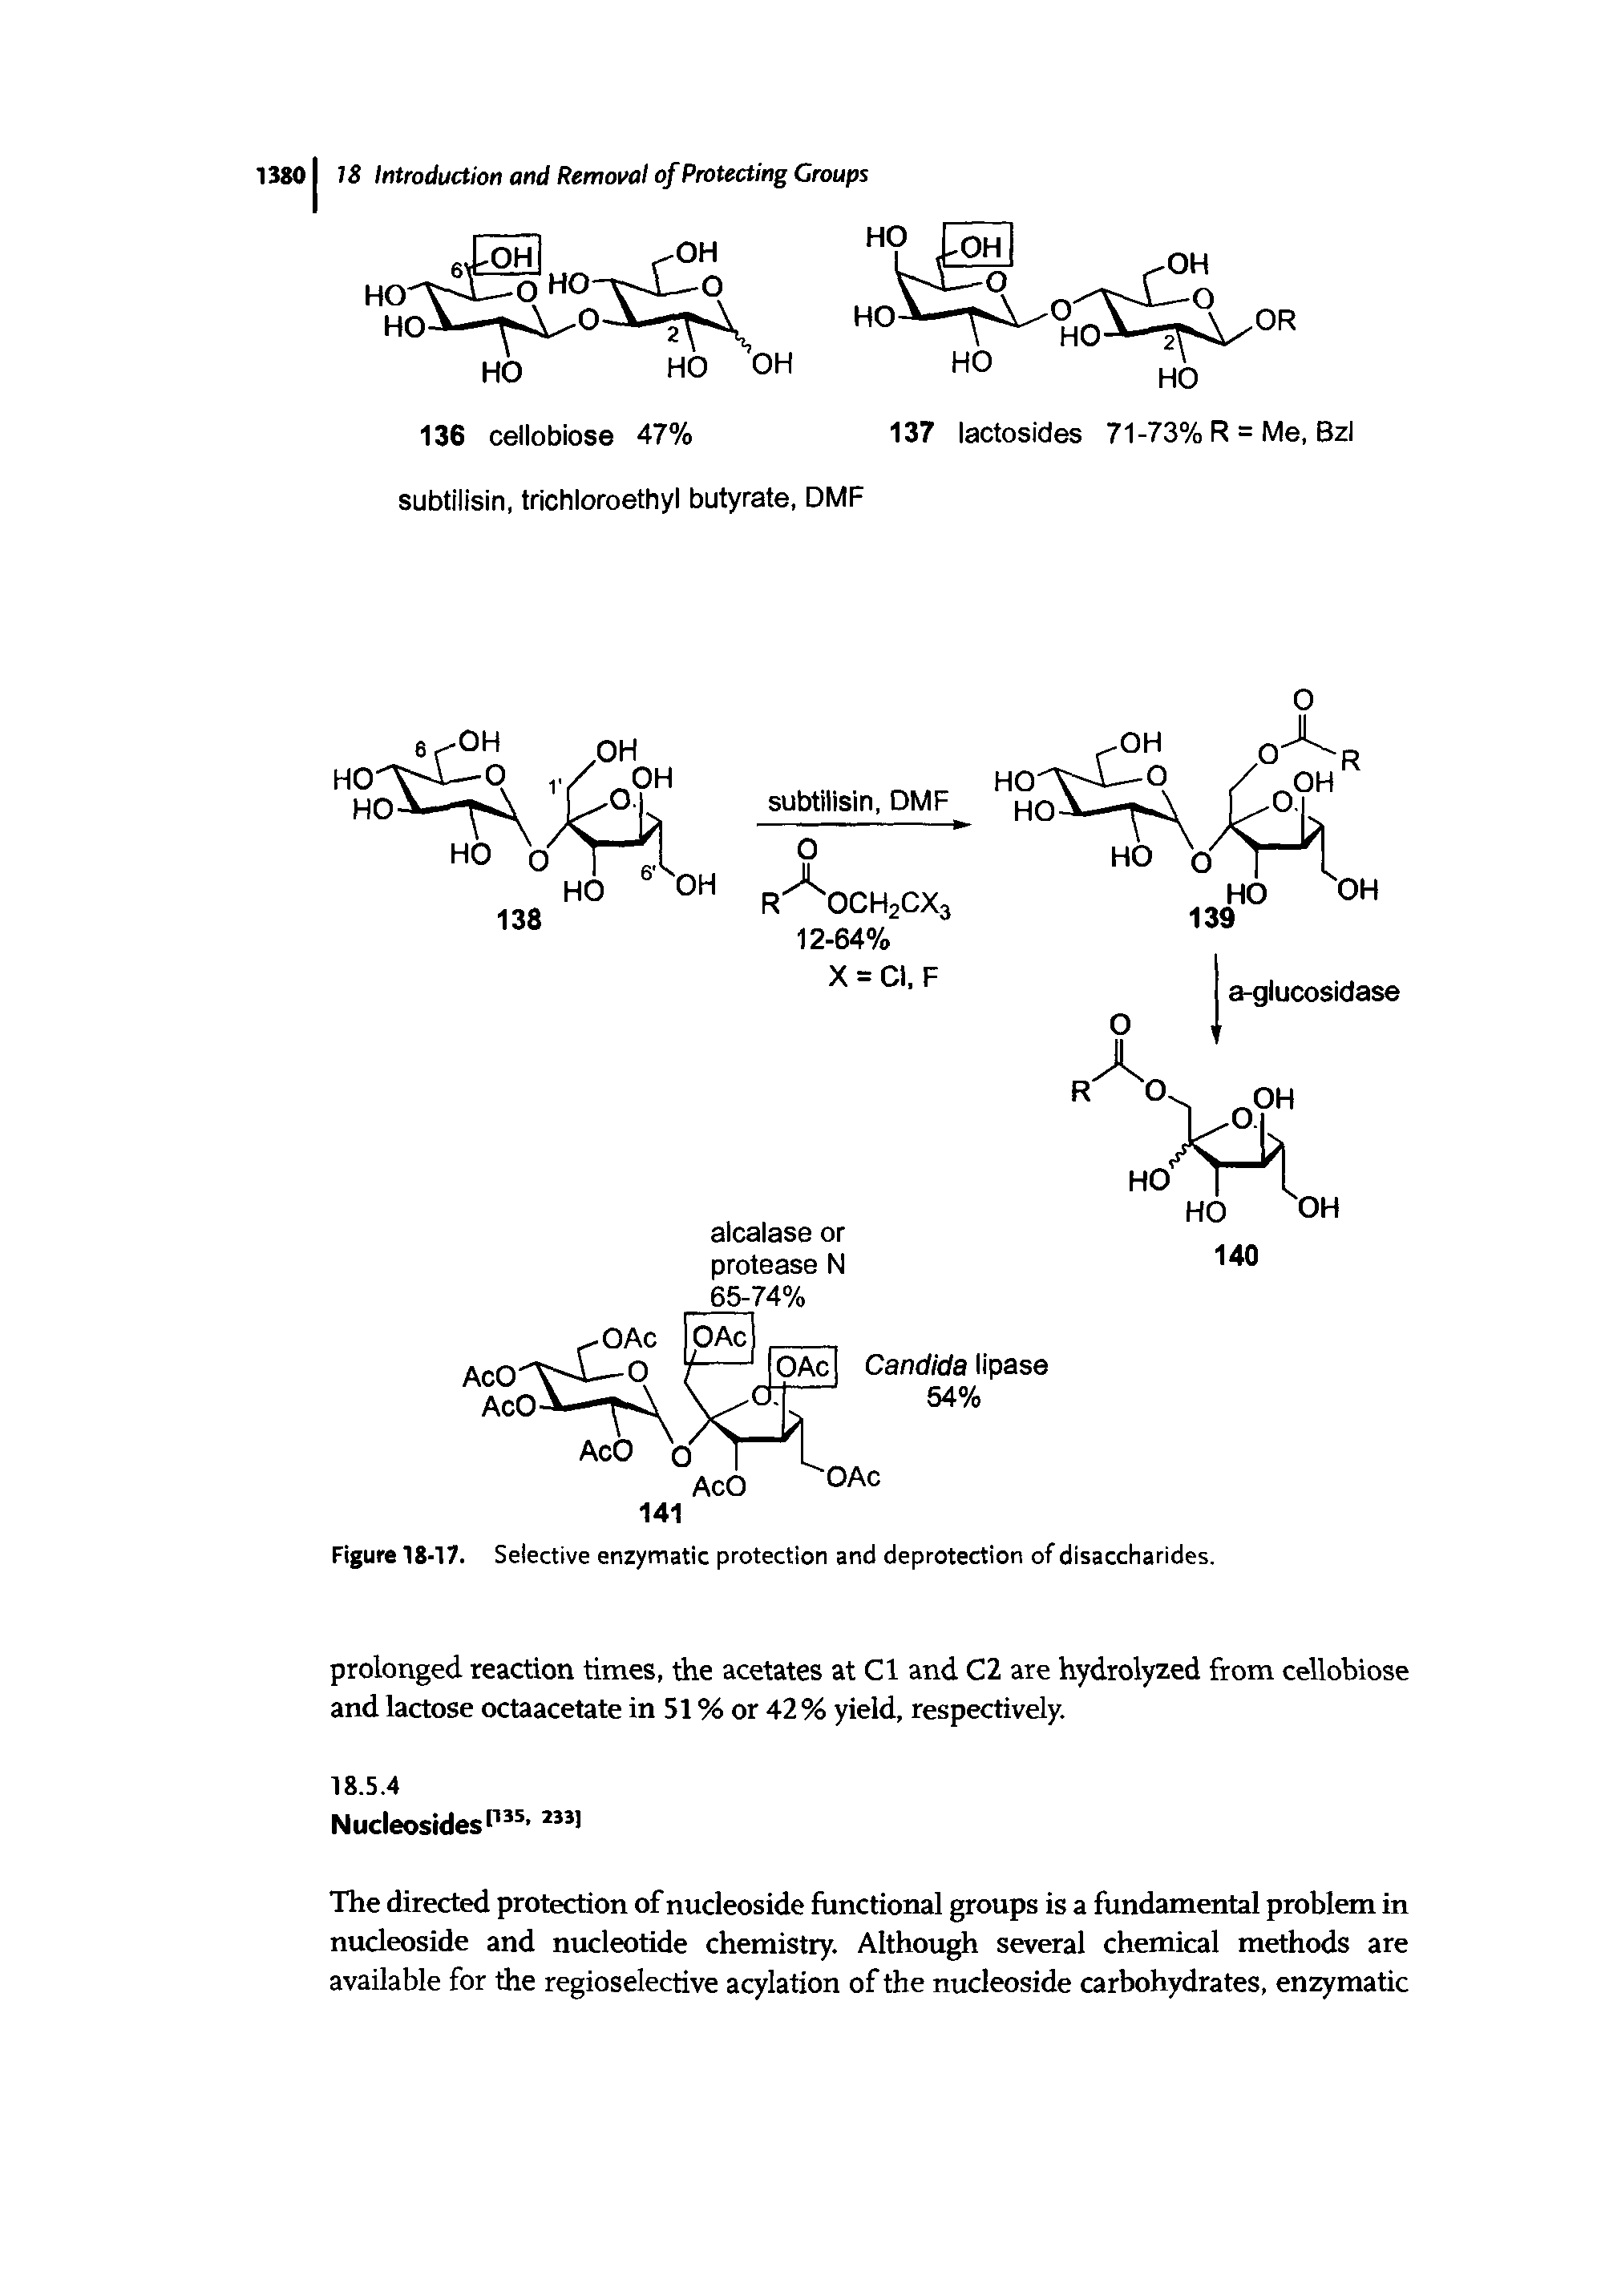 Figure 18-17. Selective enzymatic protection and deprotection of disaccharides.